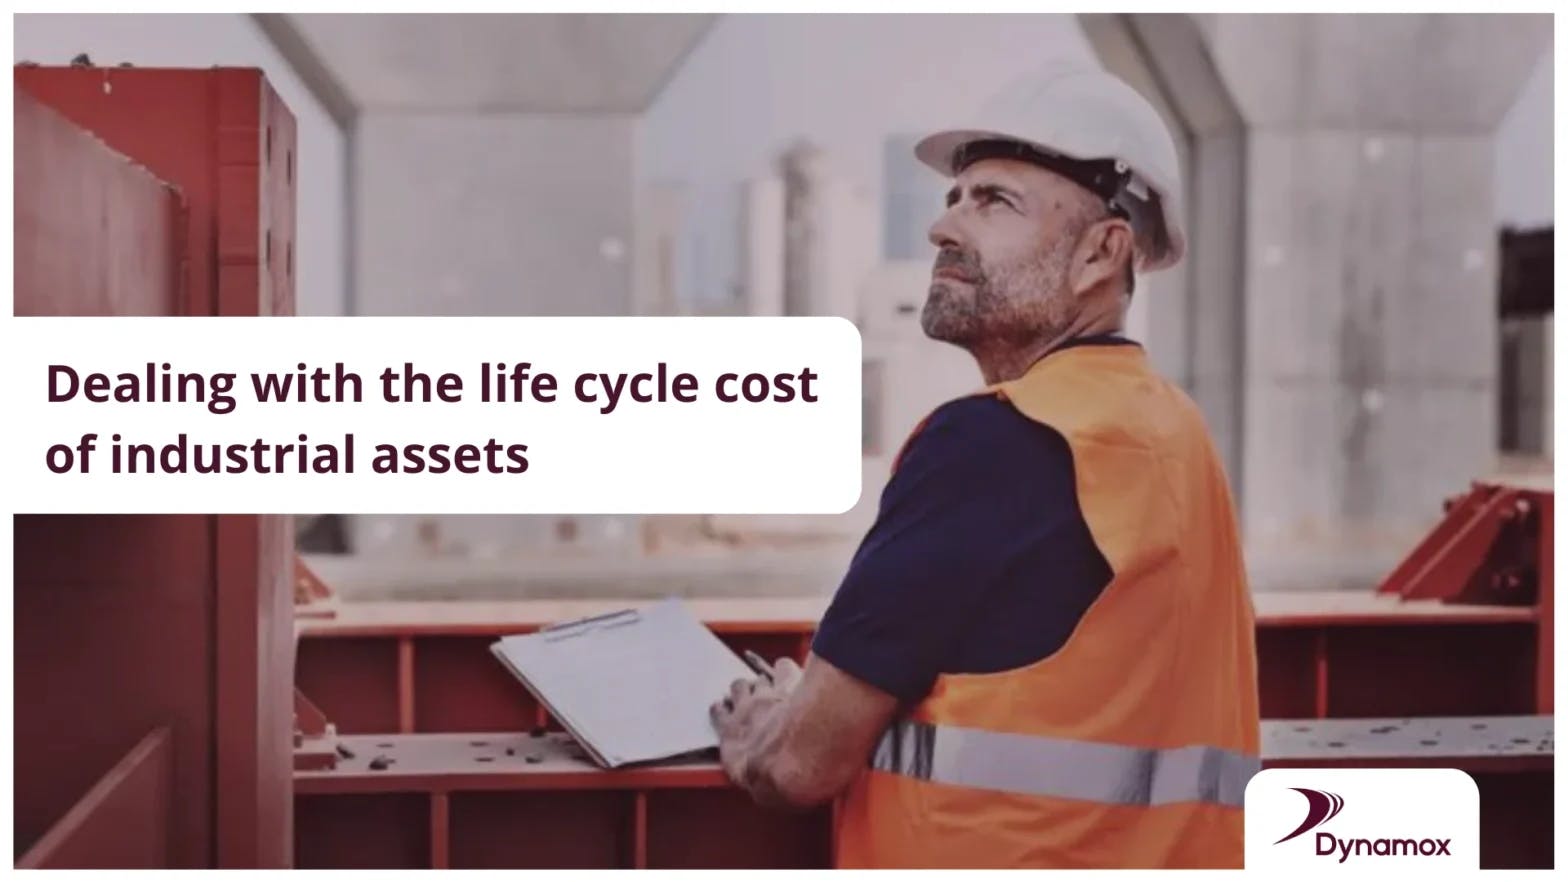 Dealing with the life cycle cost of industrial assets